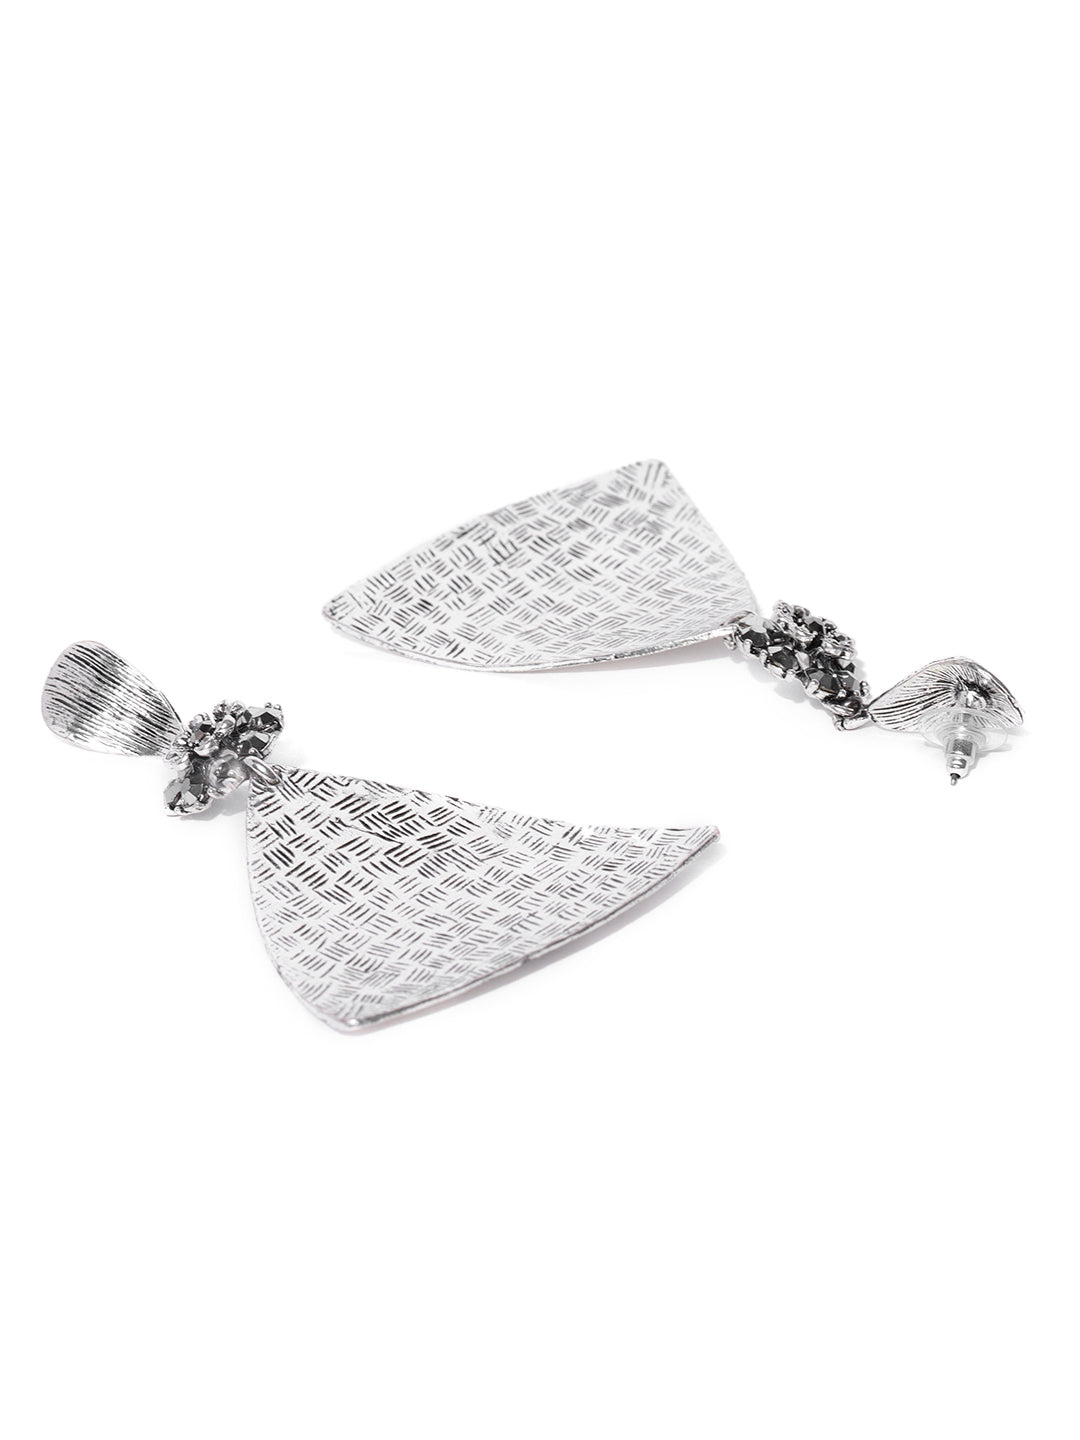 Oxidised Silver-Plated Triangular Textured Drop Earrings